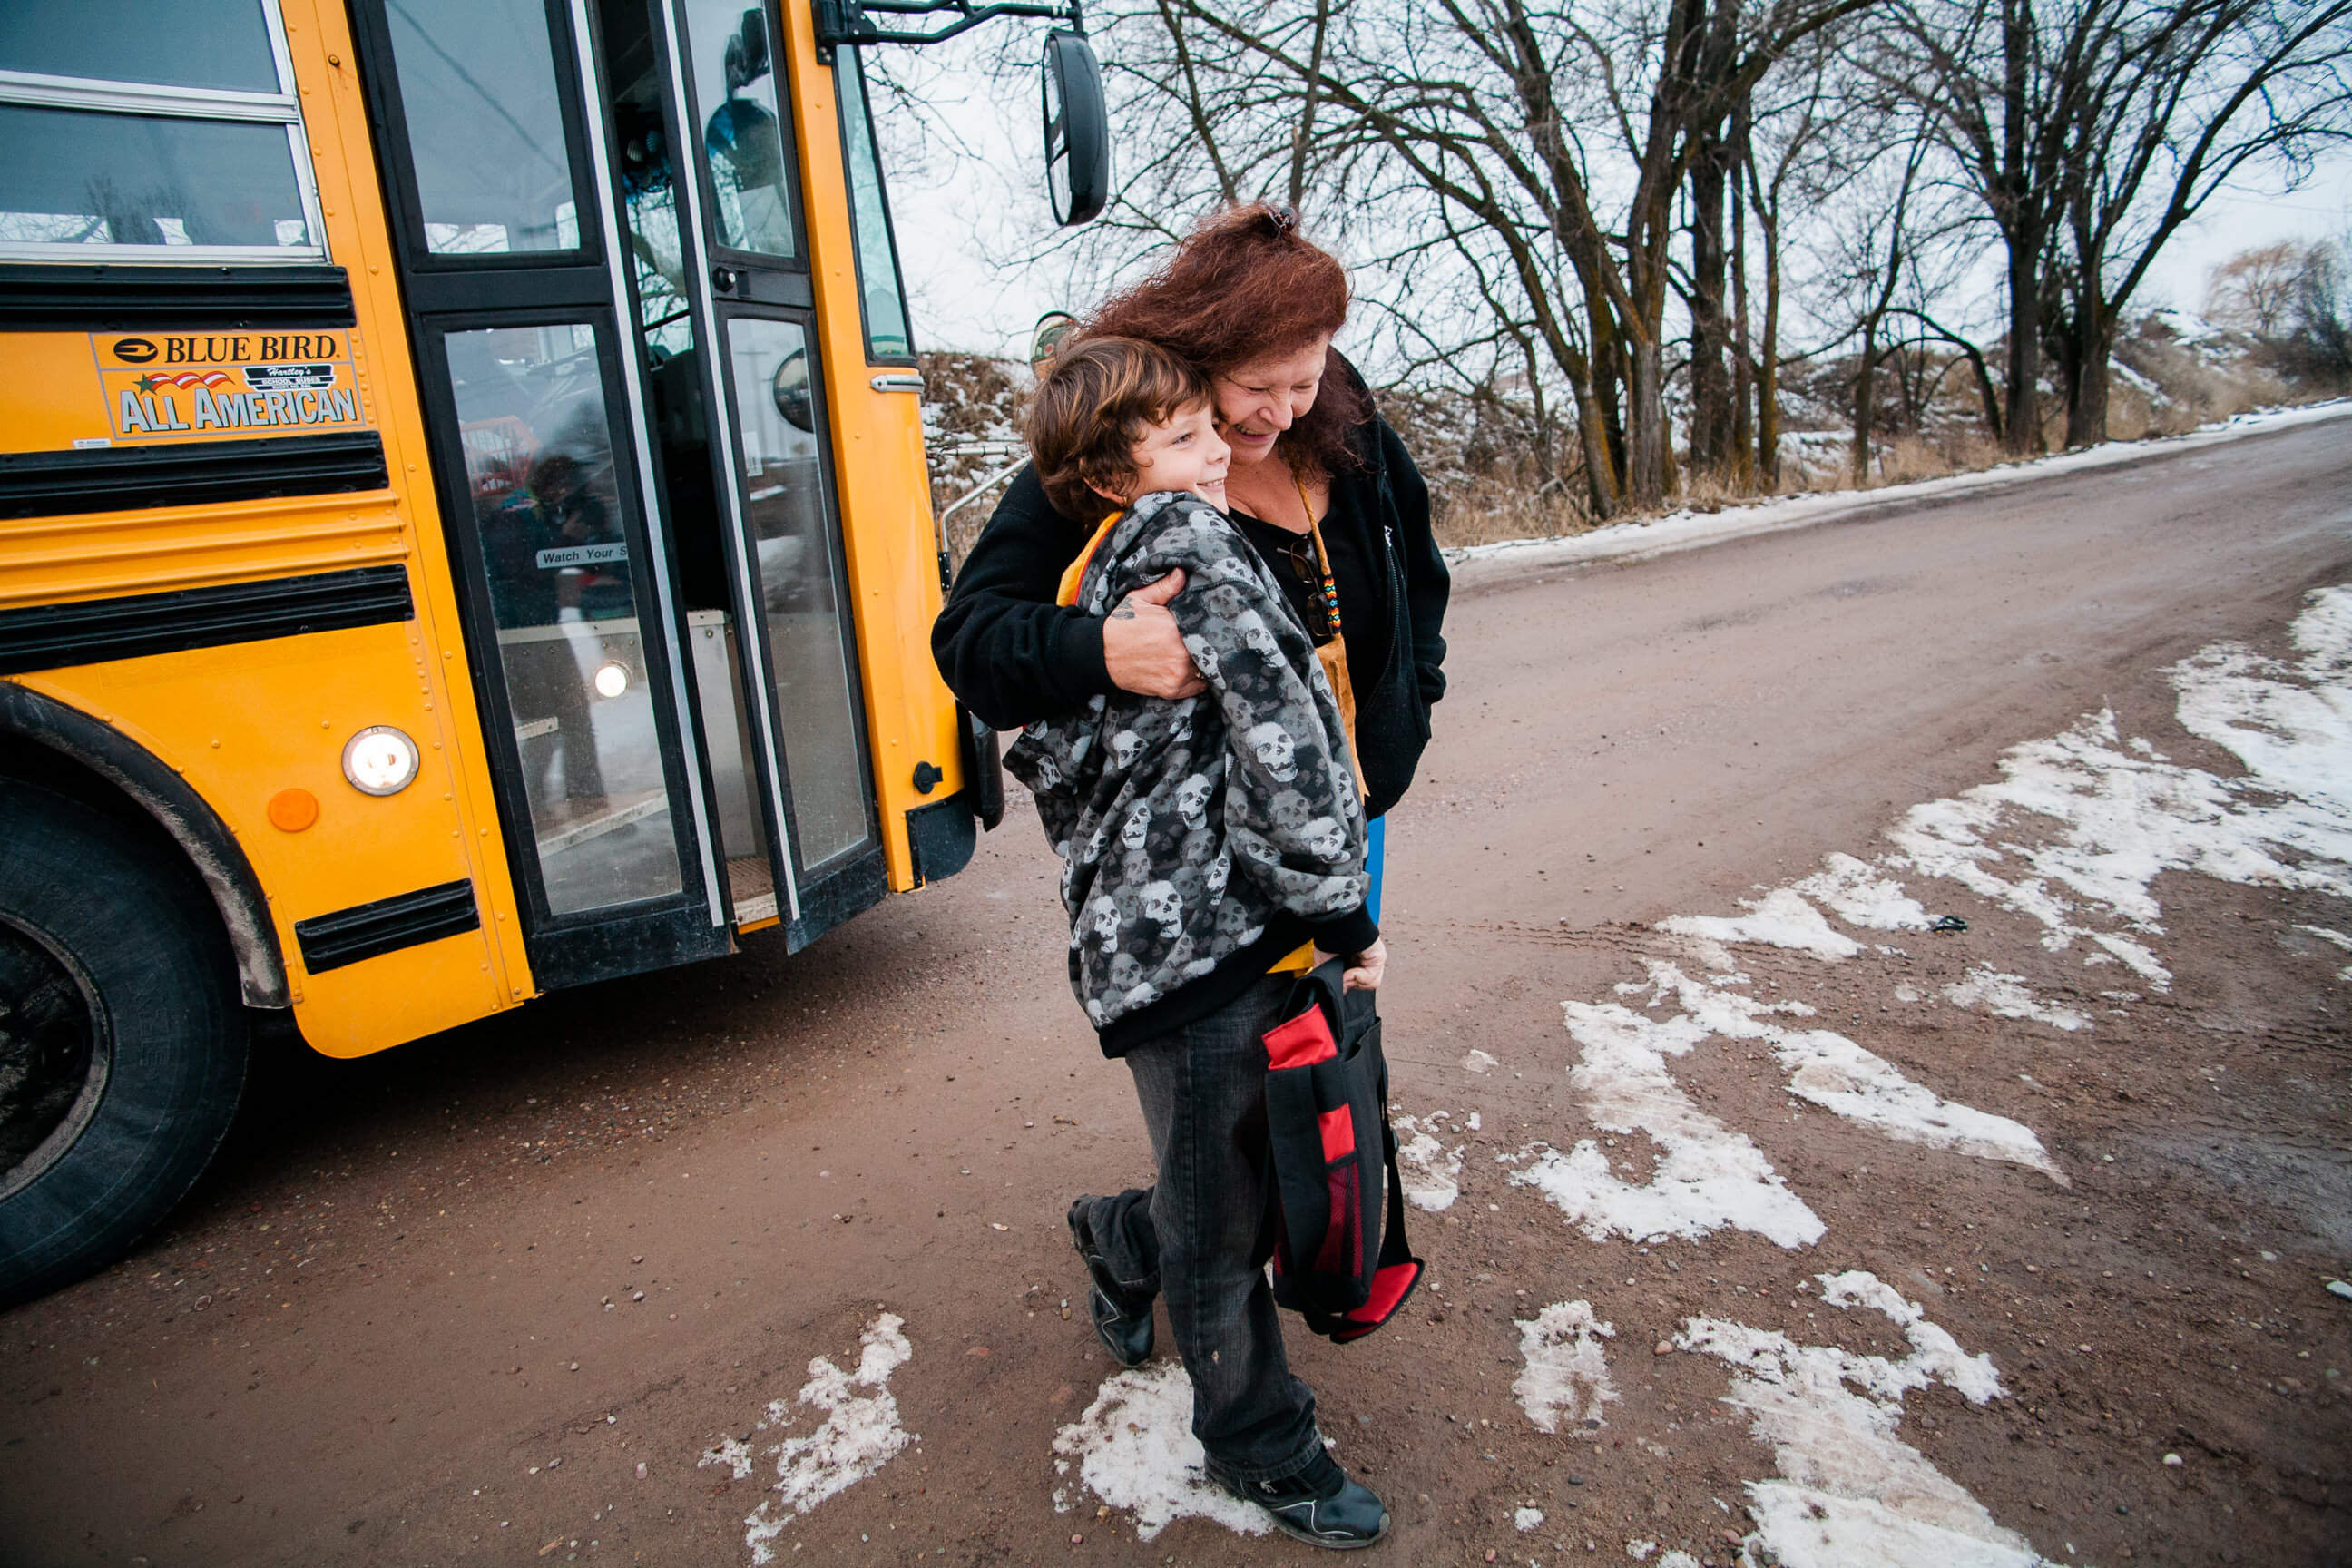 A grandmother greets her grandson as he gets off the bus in Pablo Montana